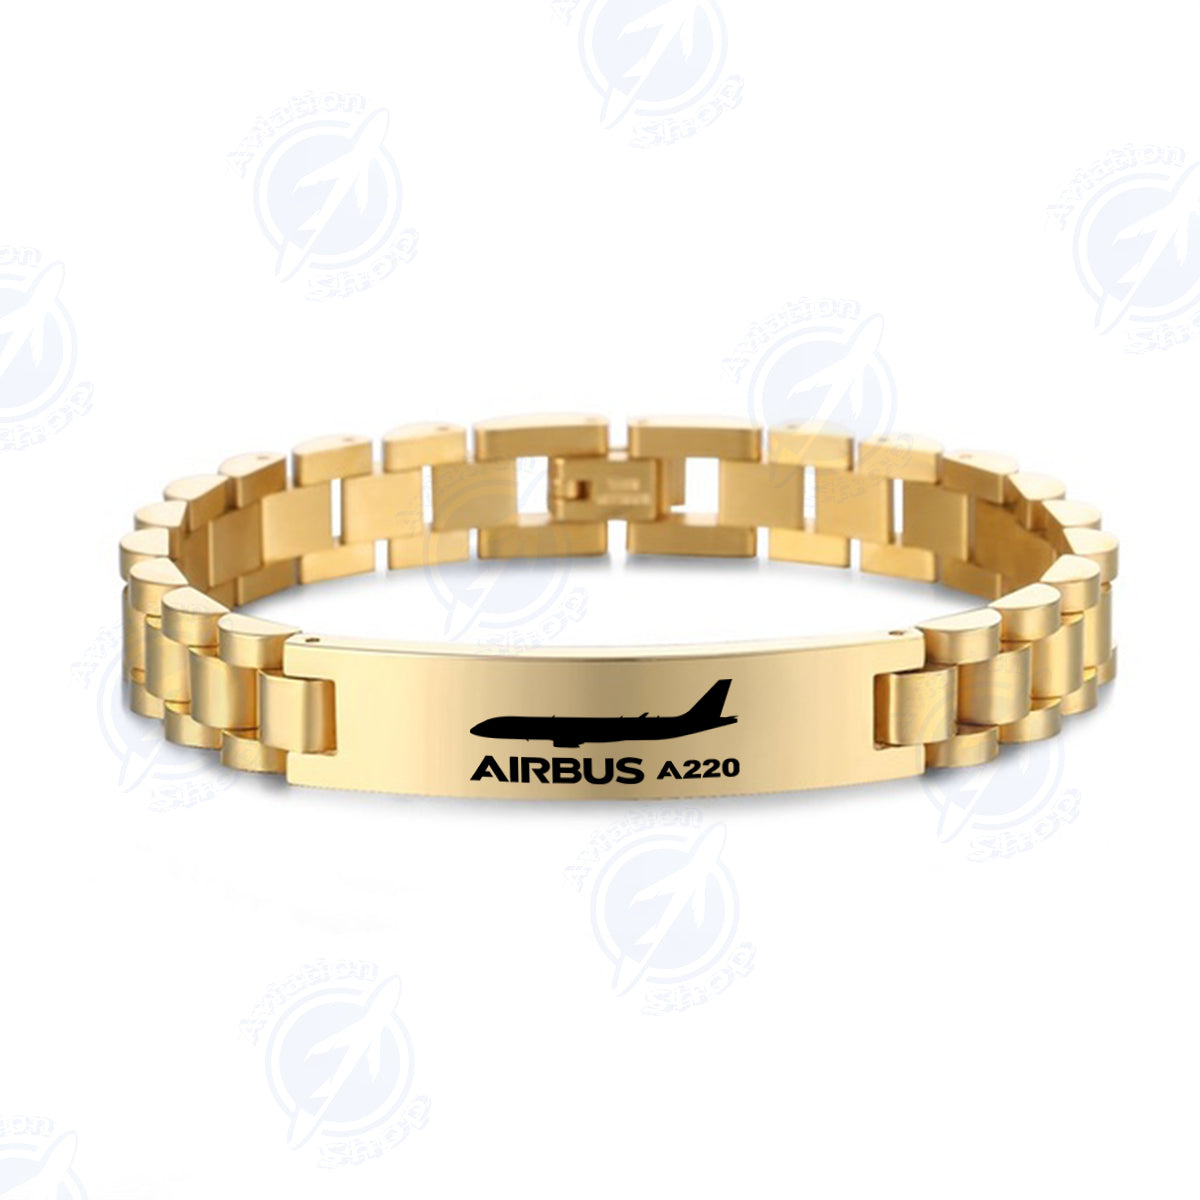 The Airbus A220 Designed Stainless Steel Chain Bracelets